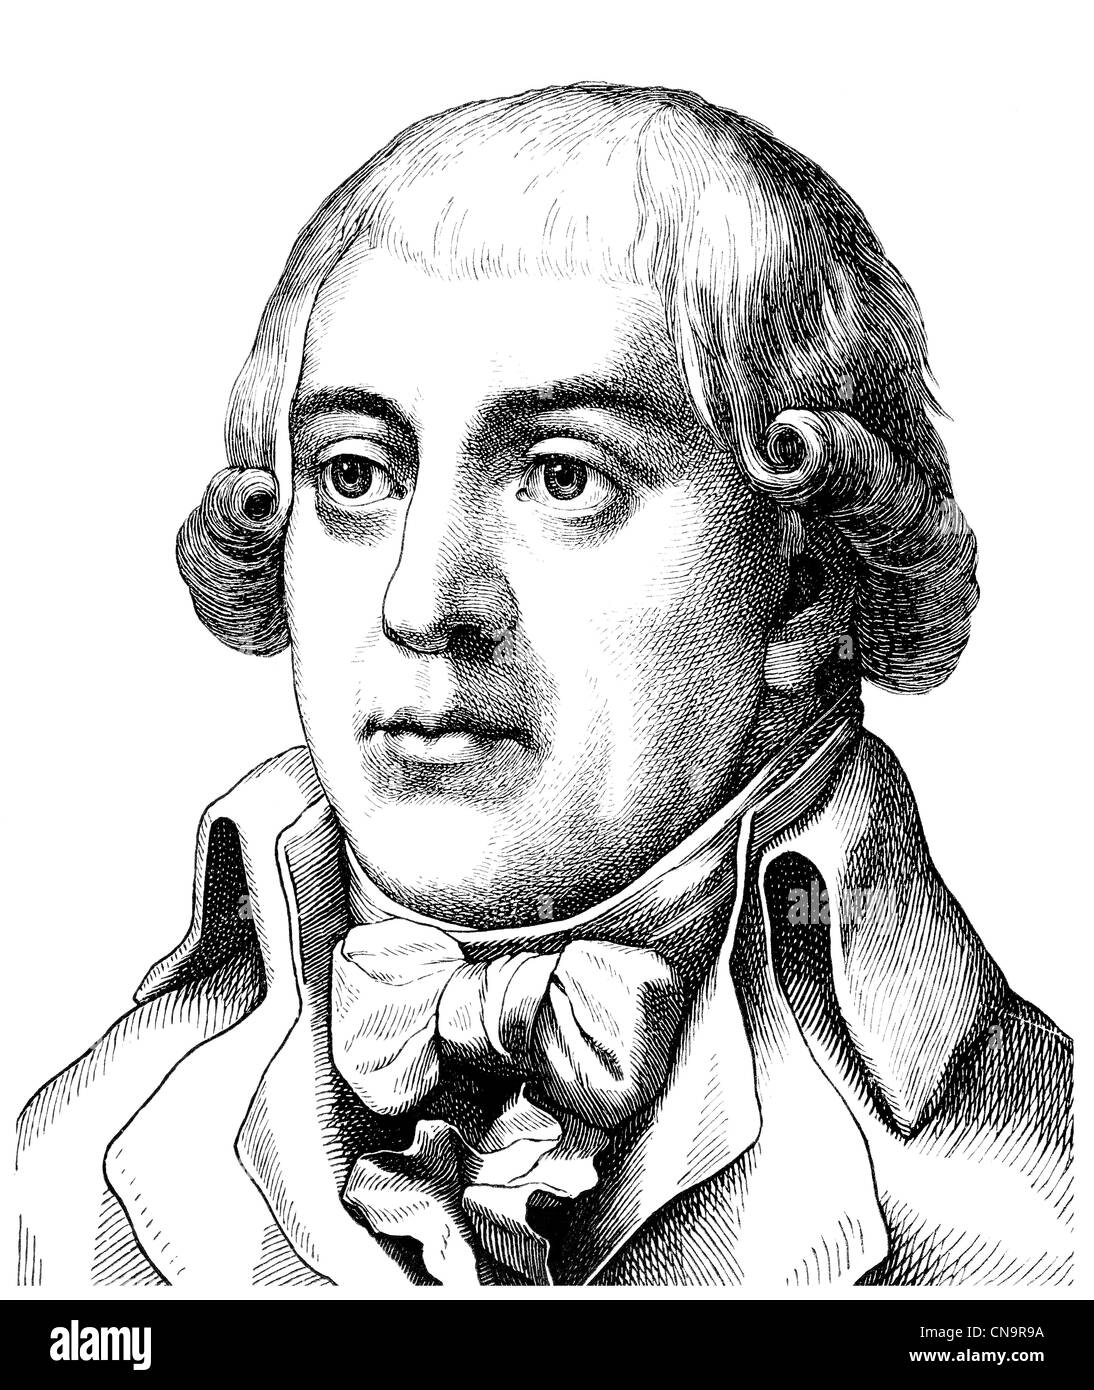 Gottfried August Buerger, 1747 - 1794, a German poet of the Enlightenment, author of The Adventures of Baron Munchausen Stock Photo